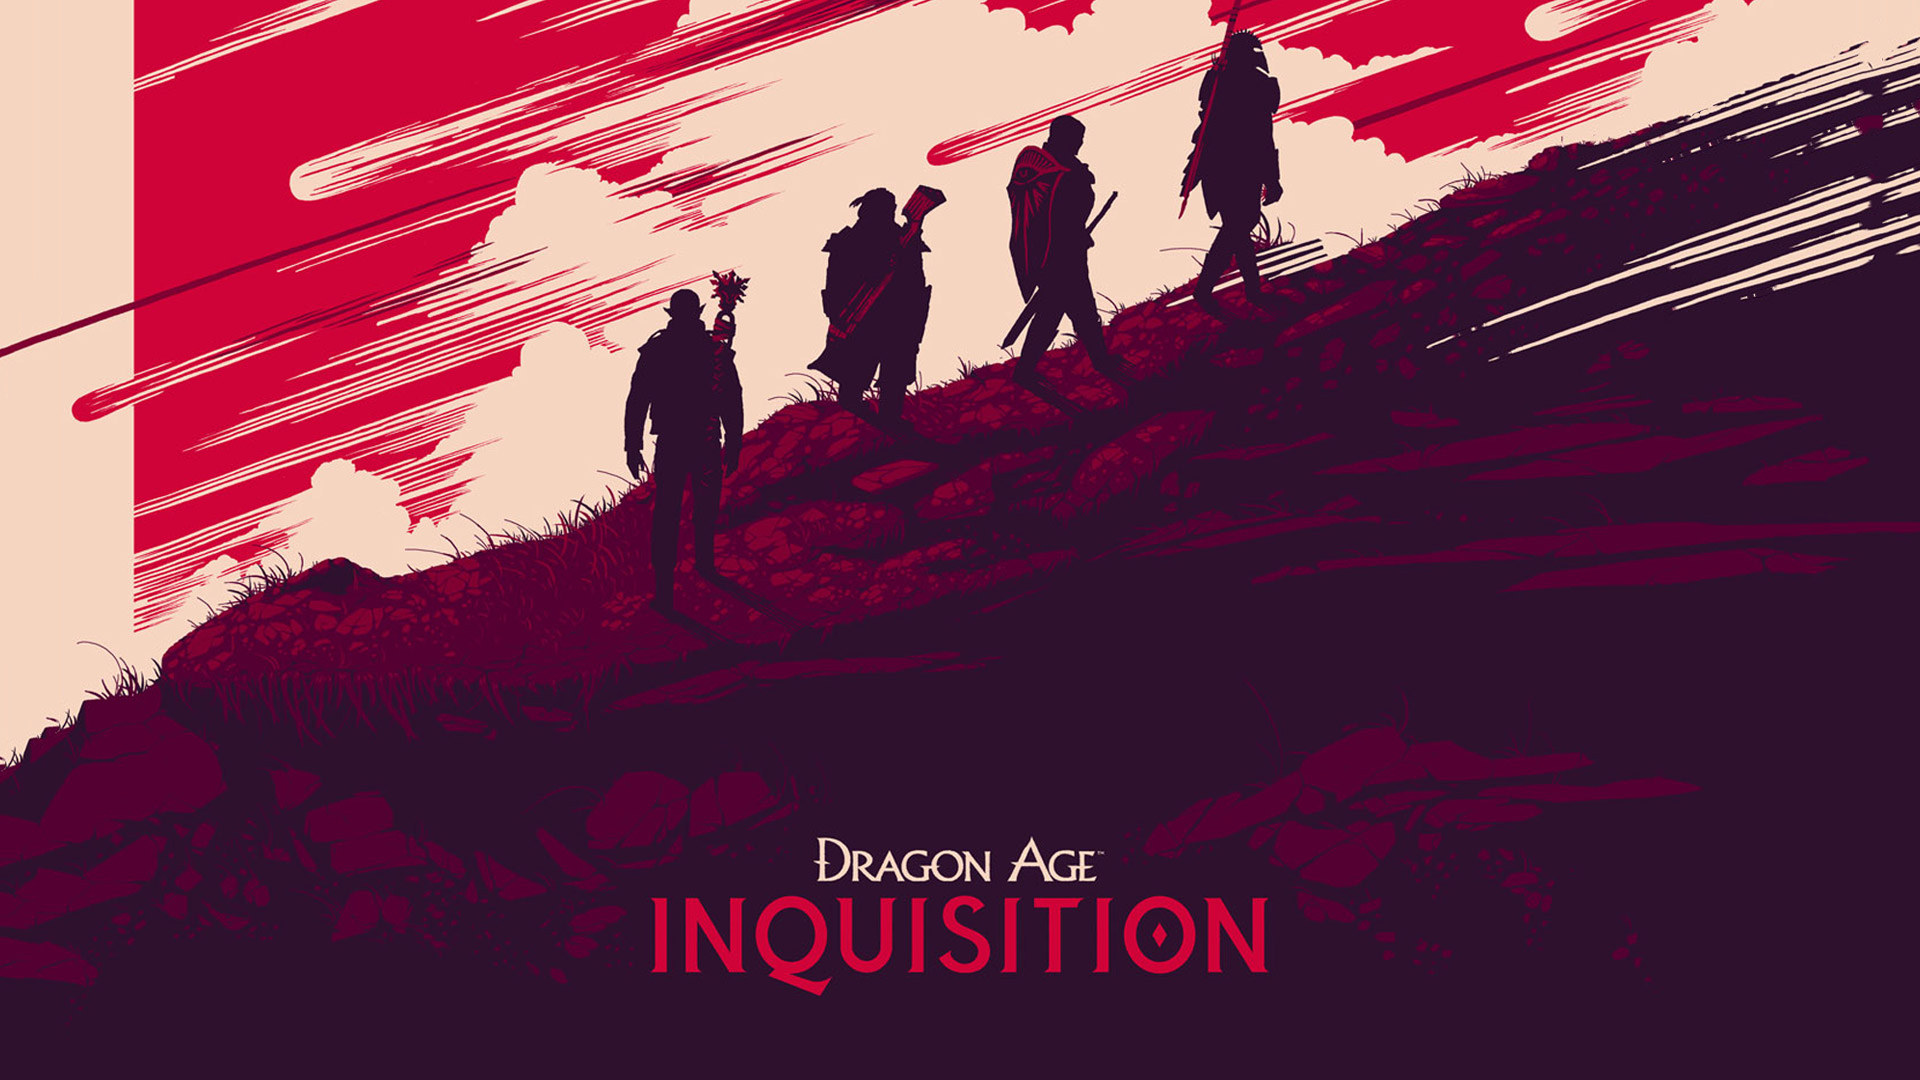 Free Dragon Age Inquisition Wallpaper in 1920x1080